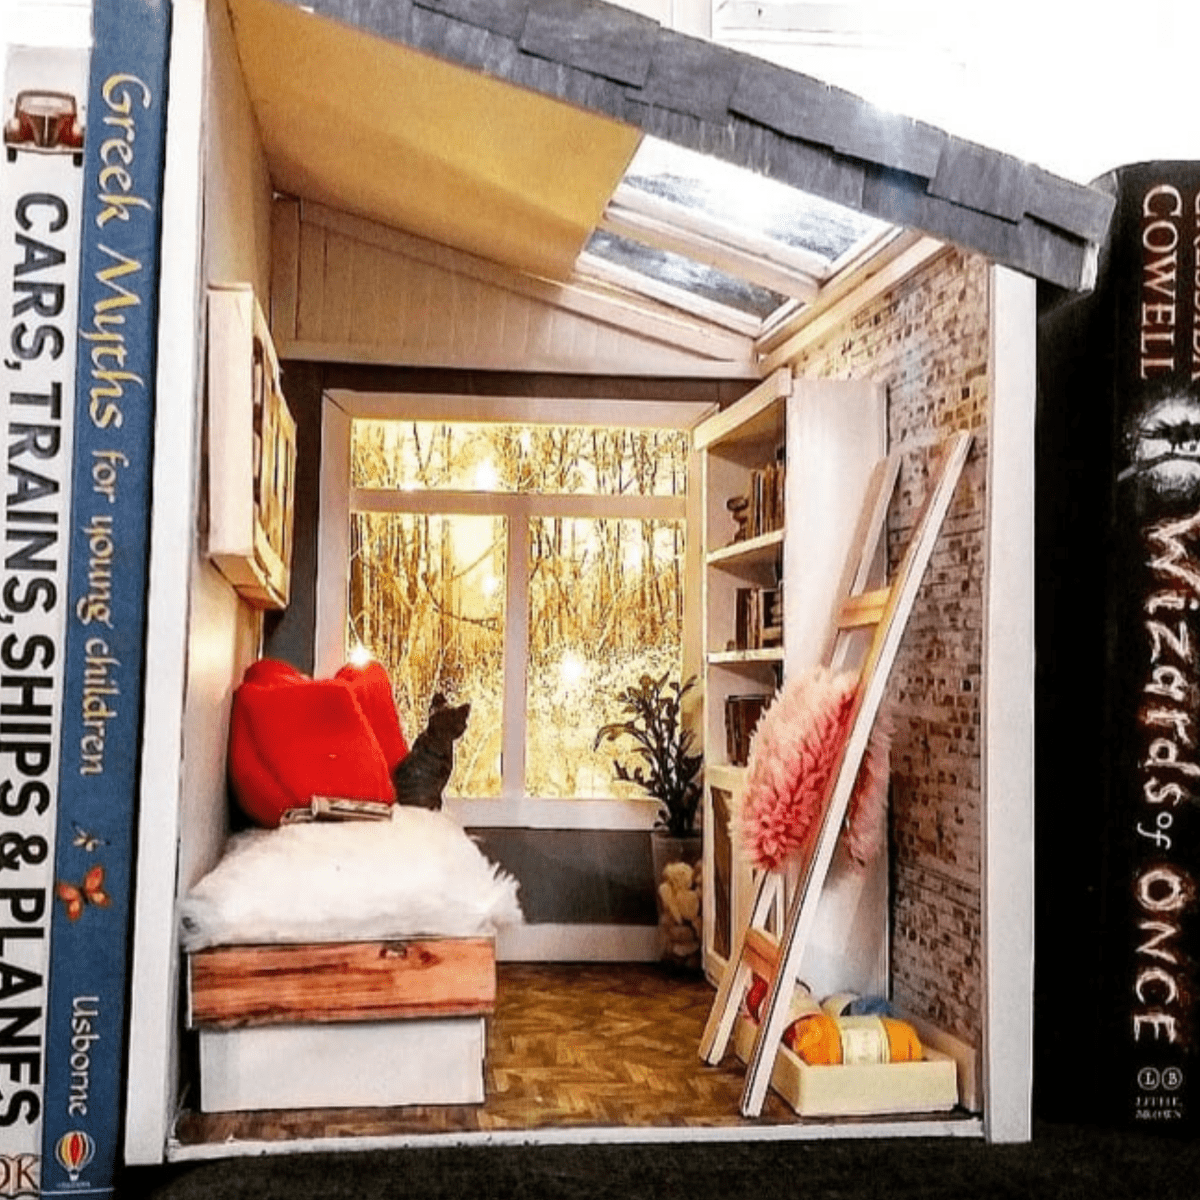 BUILDING a BOOK NOOK from Scratch 